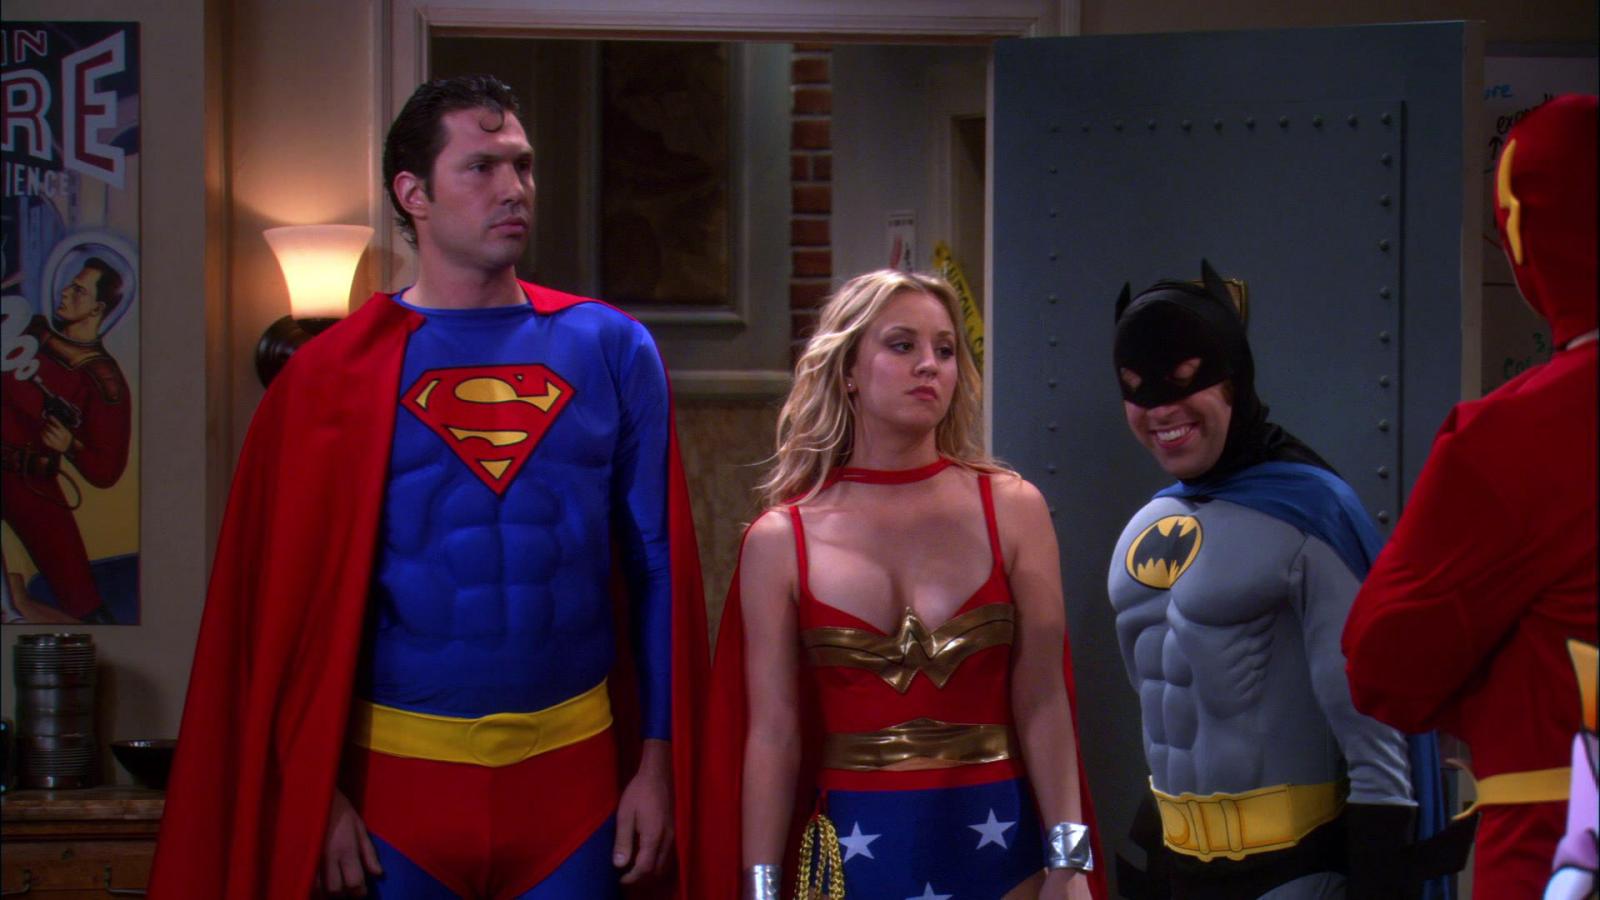 10 Big Bang Theory Relationships, Ranked from Toxic to #Soulmates - image 7